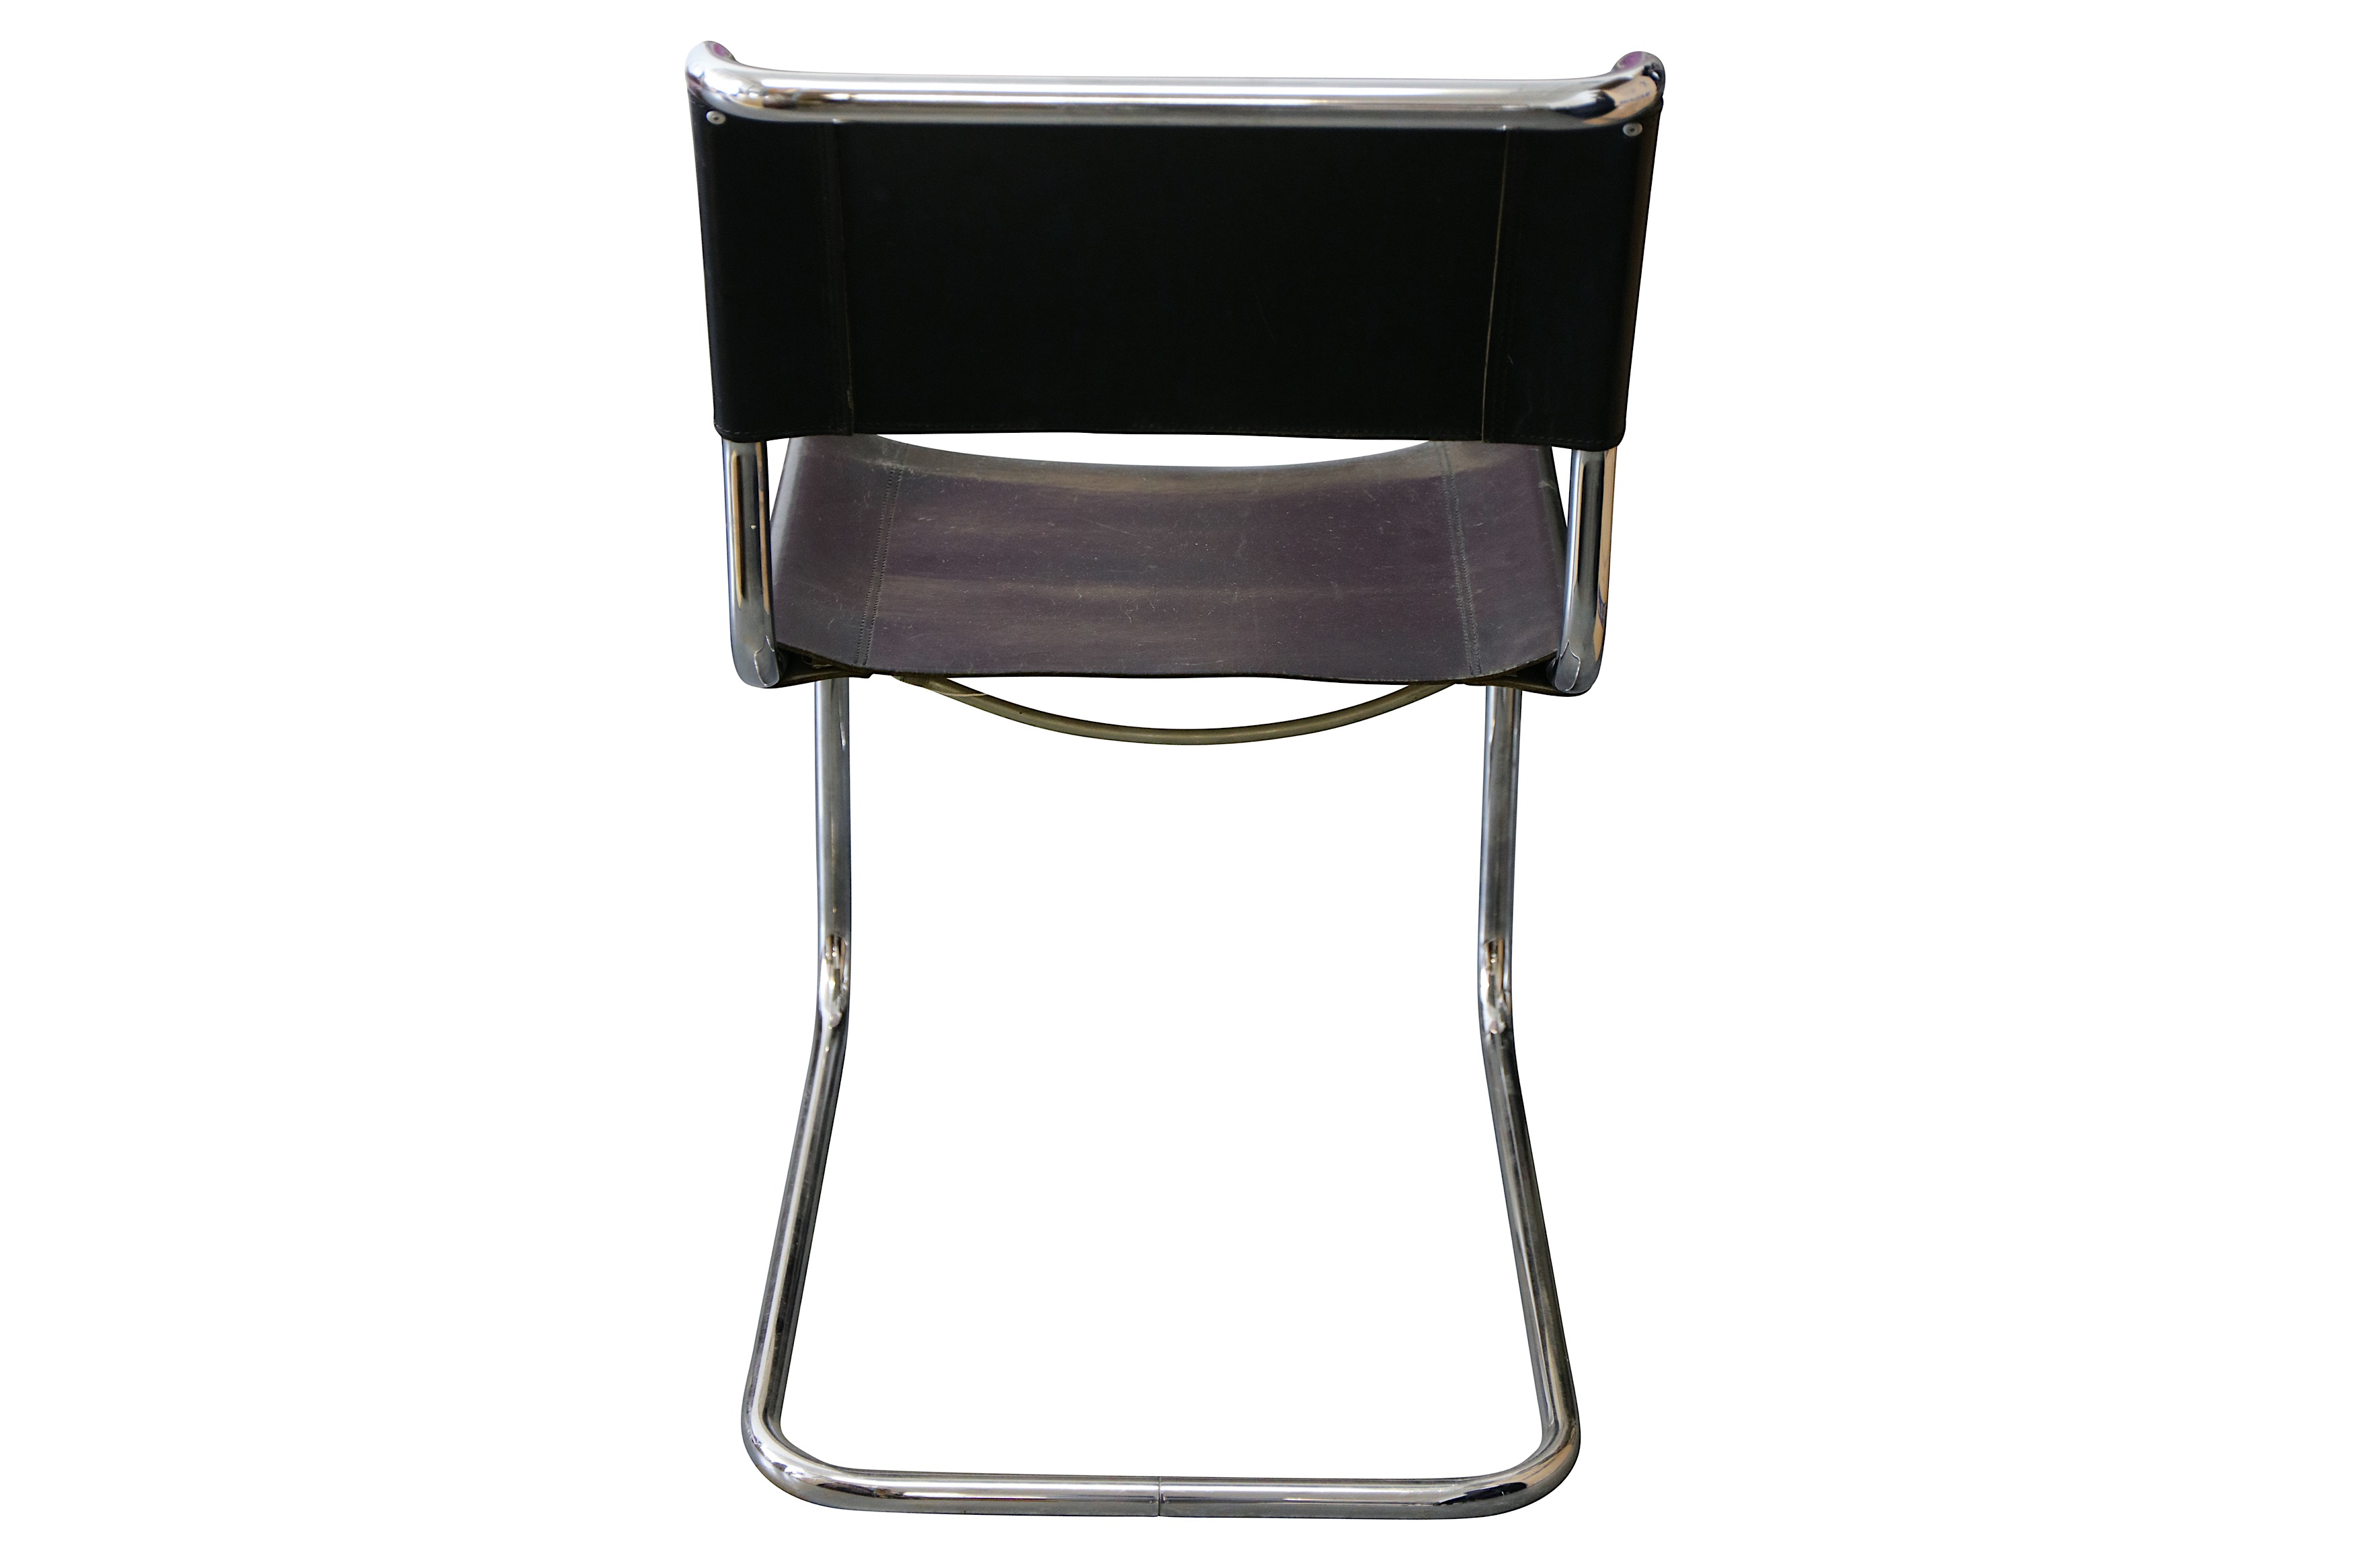 A Thonet Mart Stam S 33 black leather upholstered tubular steel cantilever dining chair - Image 2 of 4